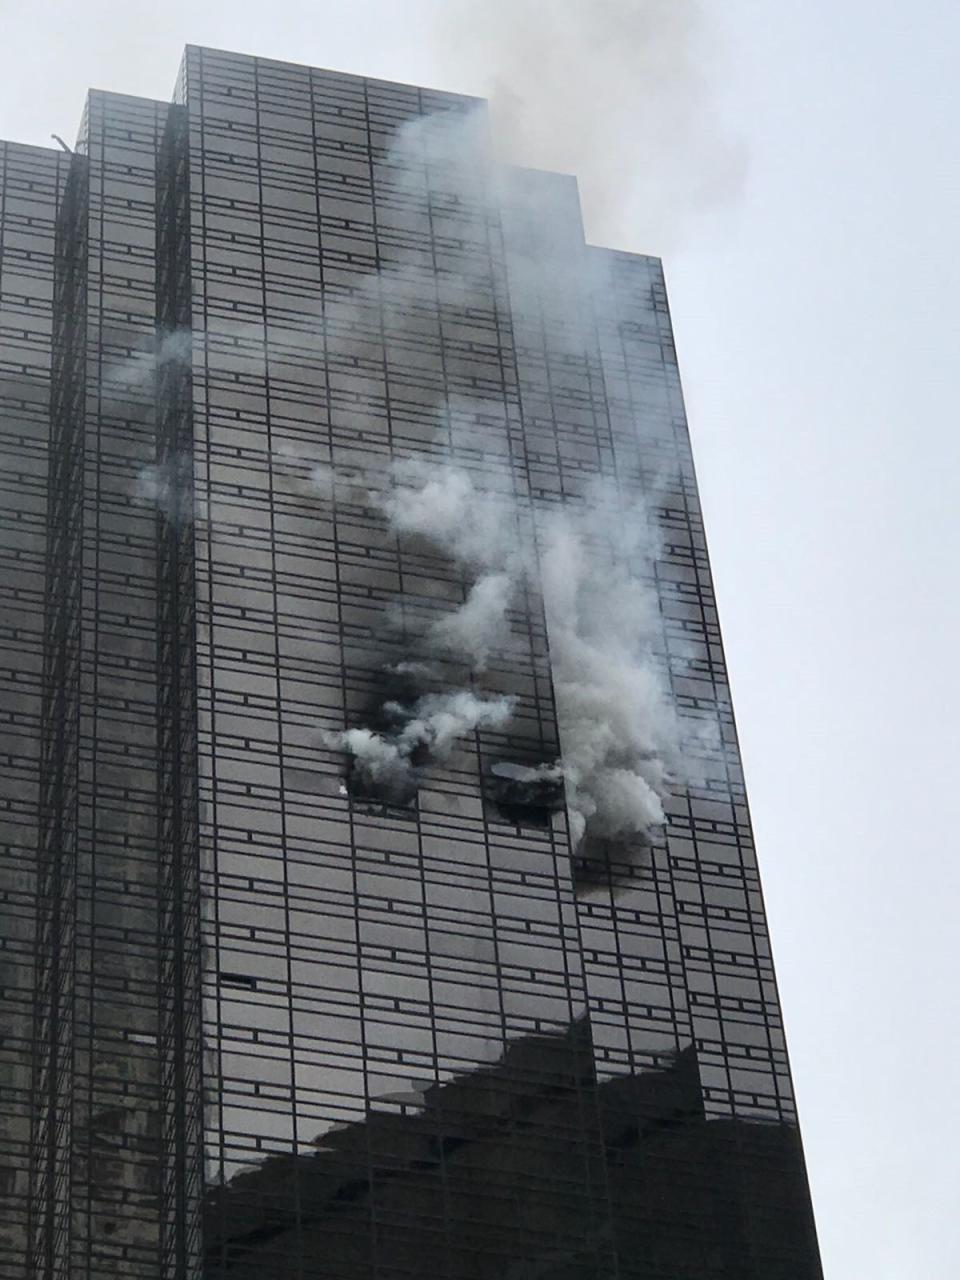 A fire that broke out Saturday&nbsp;at Trump Tower in New York City left one resident dead and six firefighters injured. (Photo: Muhammed Said Tanl/Anadolu Agency/Getty Images)